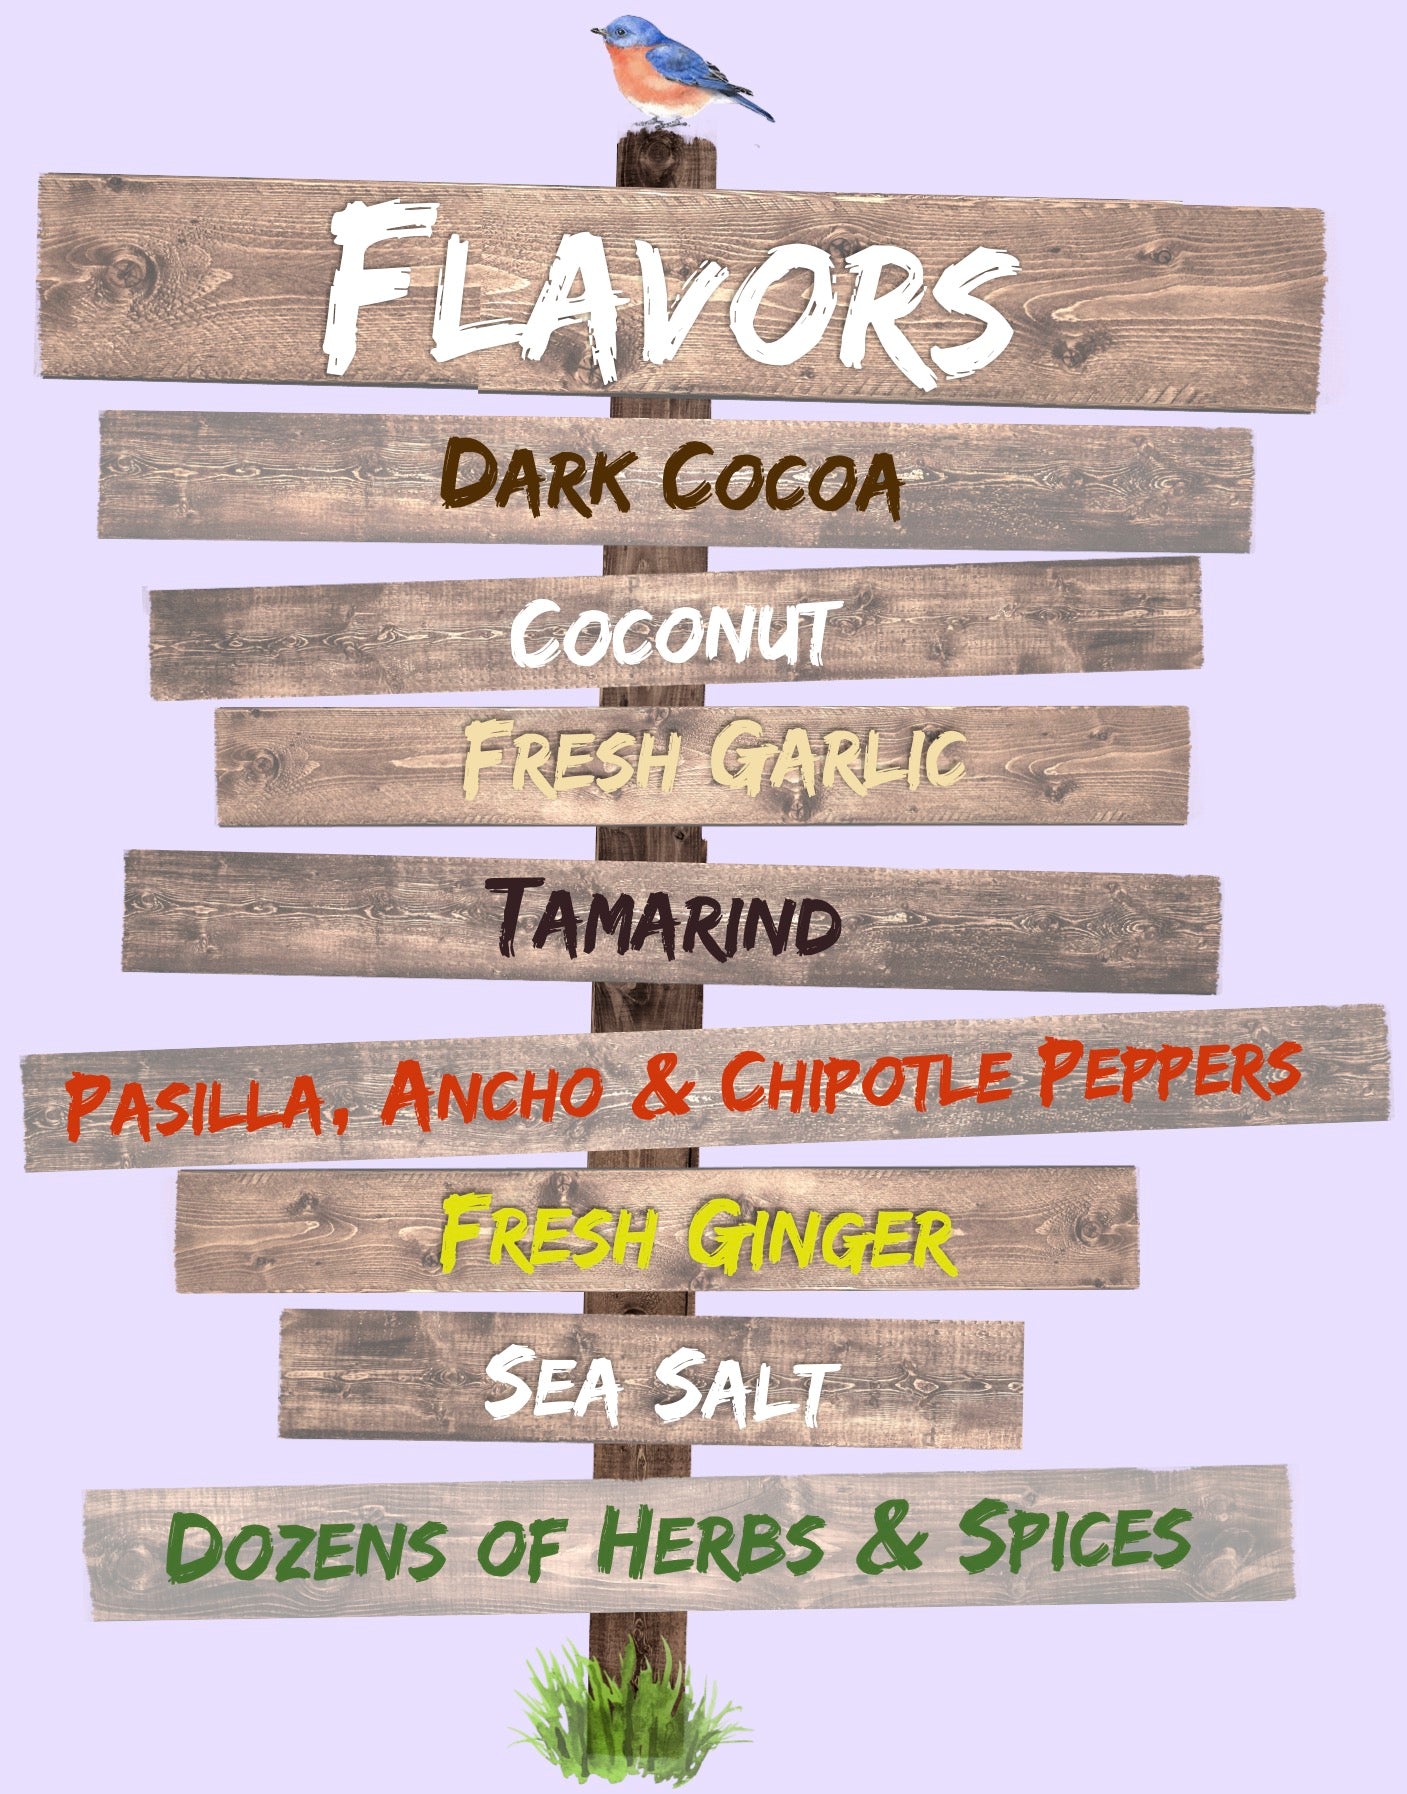 Sign listing Papa's ingredients: Flavors: Dark Cocoa, Coconut, Fresh Garlic, Tamarind, Pasilla, Ancho & Chipotle peppers, Fresh Ginger, Sea Salt and Dozens of Herbs & spices.